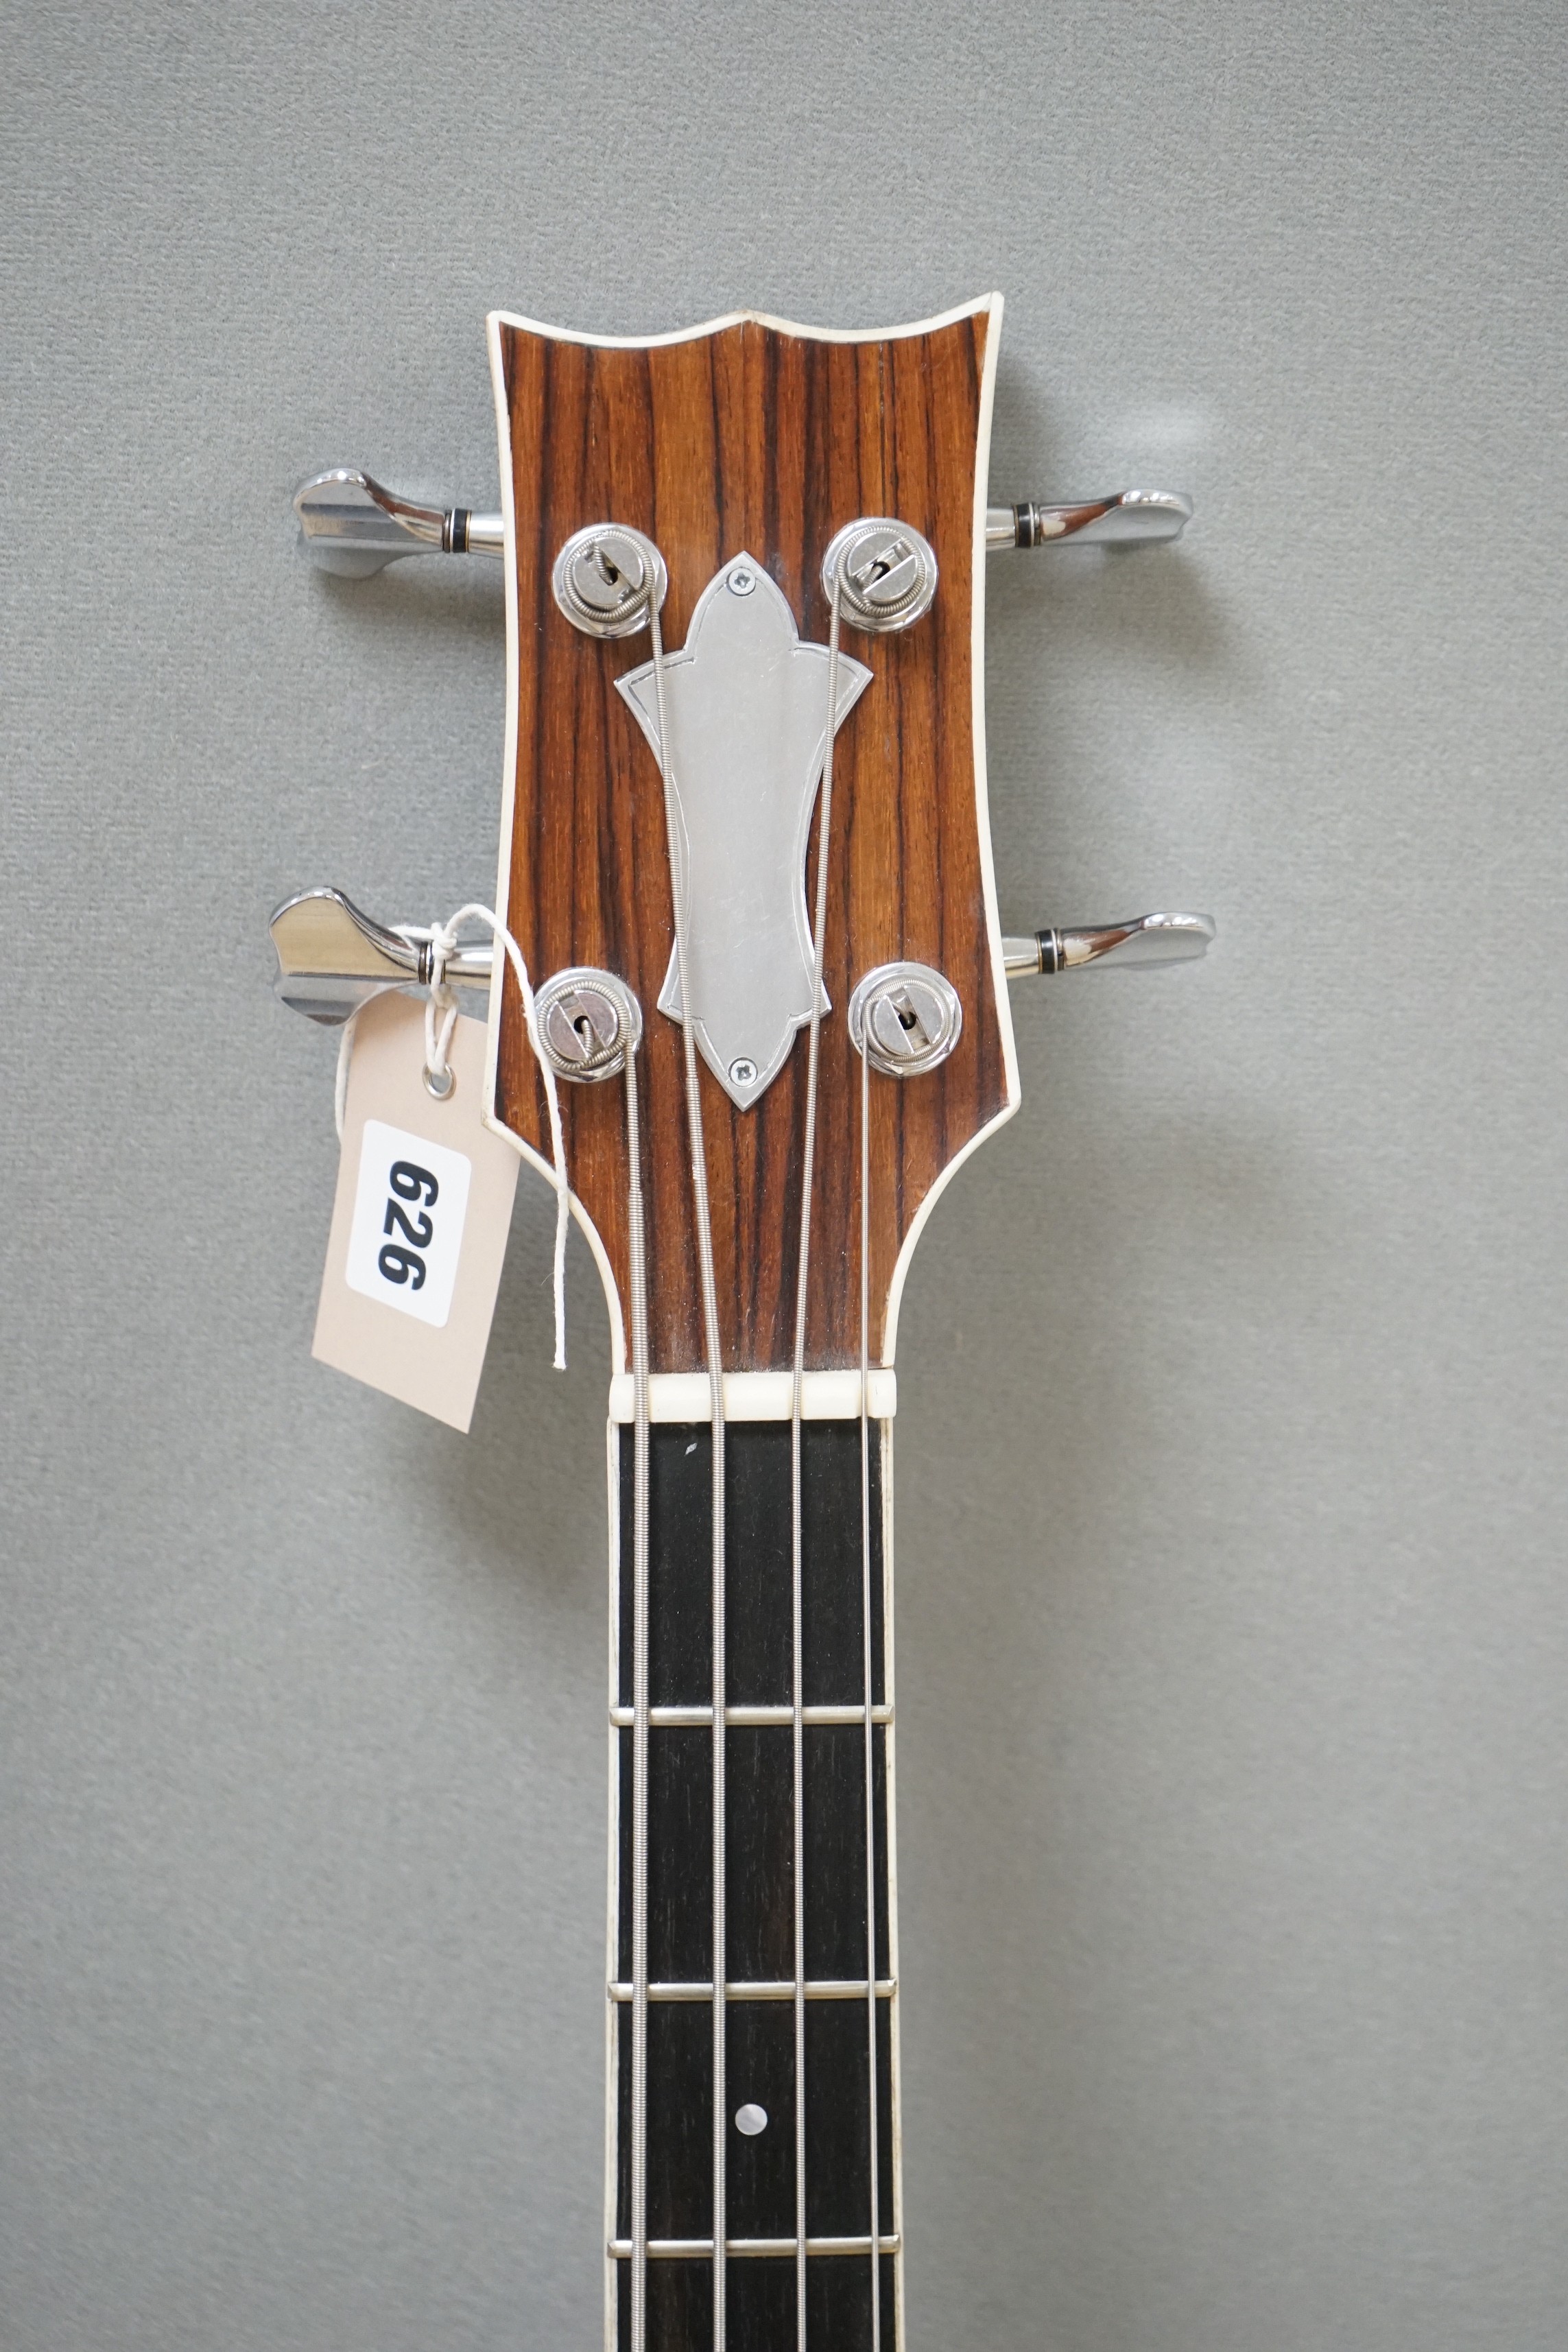 An Acoustic bass guitar, made by John Degay of Degay Guitars